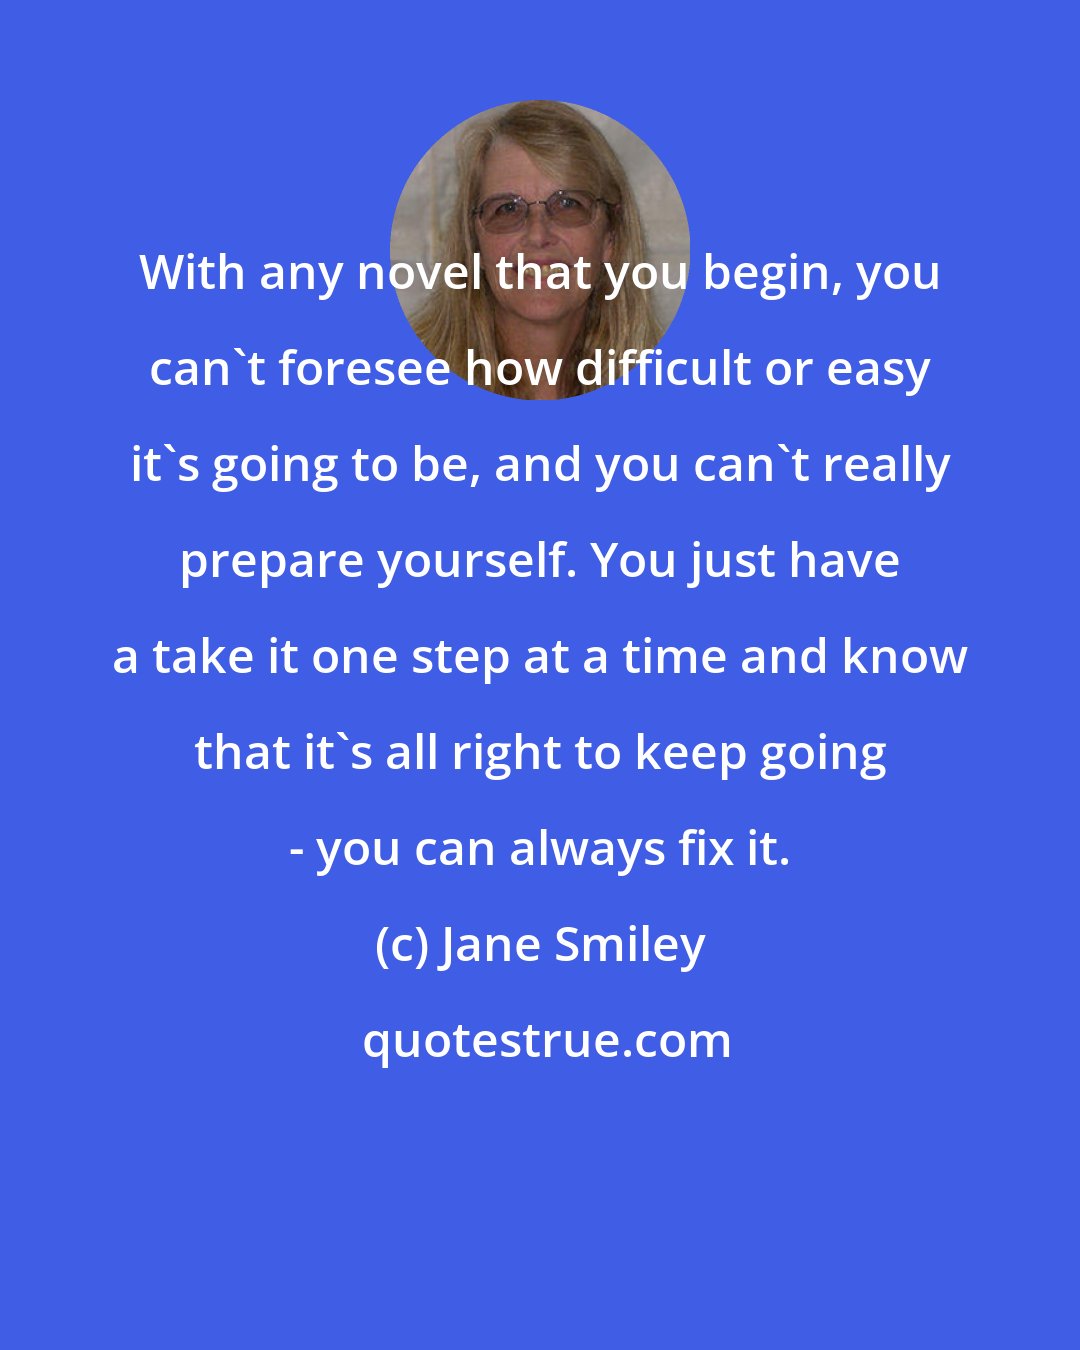 Jane Smiley: With any novel that you begin, you can't foresee how difficult or easy it's going to be, and you can't really prepare yourself. You just have a take it one step at a time and know that it's all right to keep going - you can always fix it.